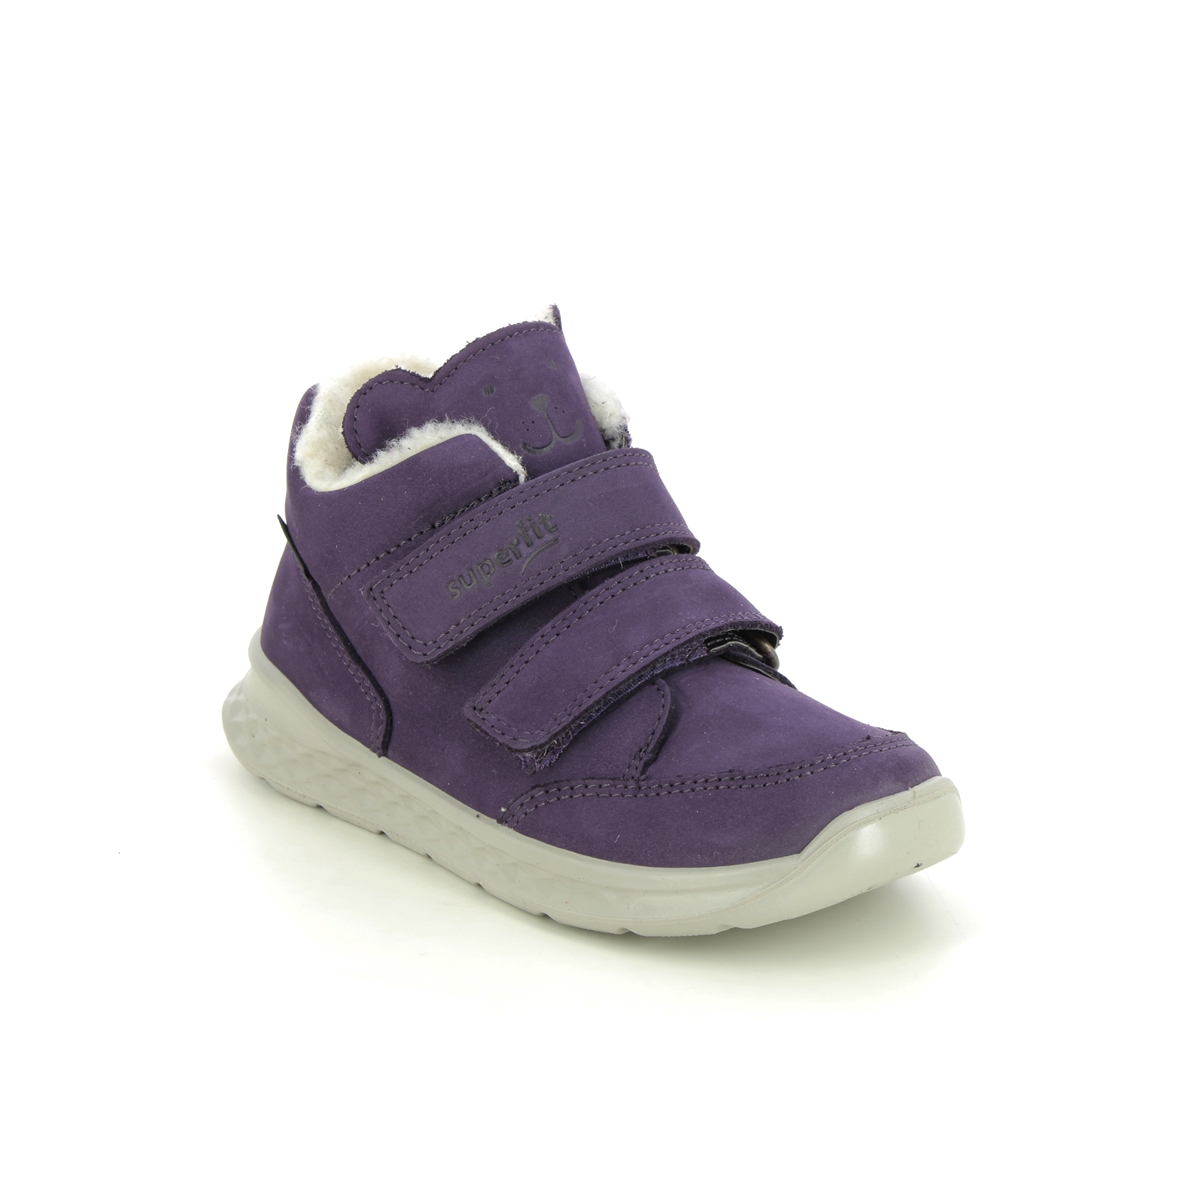 Superfit Breeze 2v Gtx Purple Nubuck Kids Toddler Girls Boots 1000372-8500 in a Plain Leather in Size 25